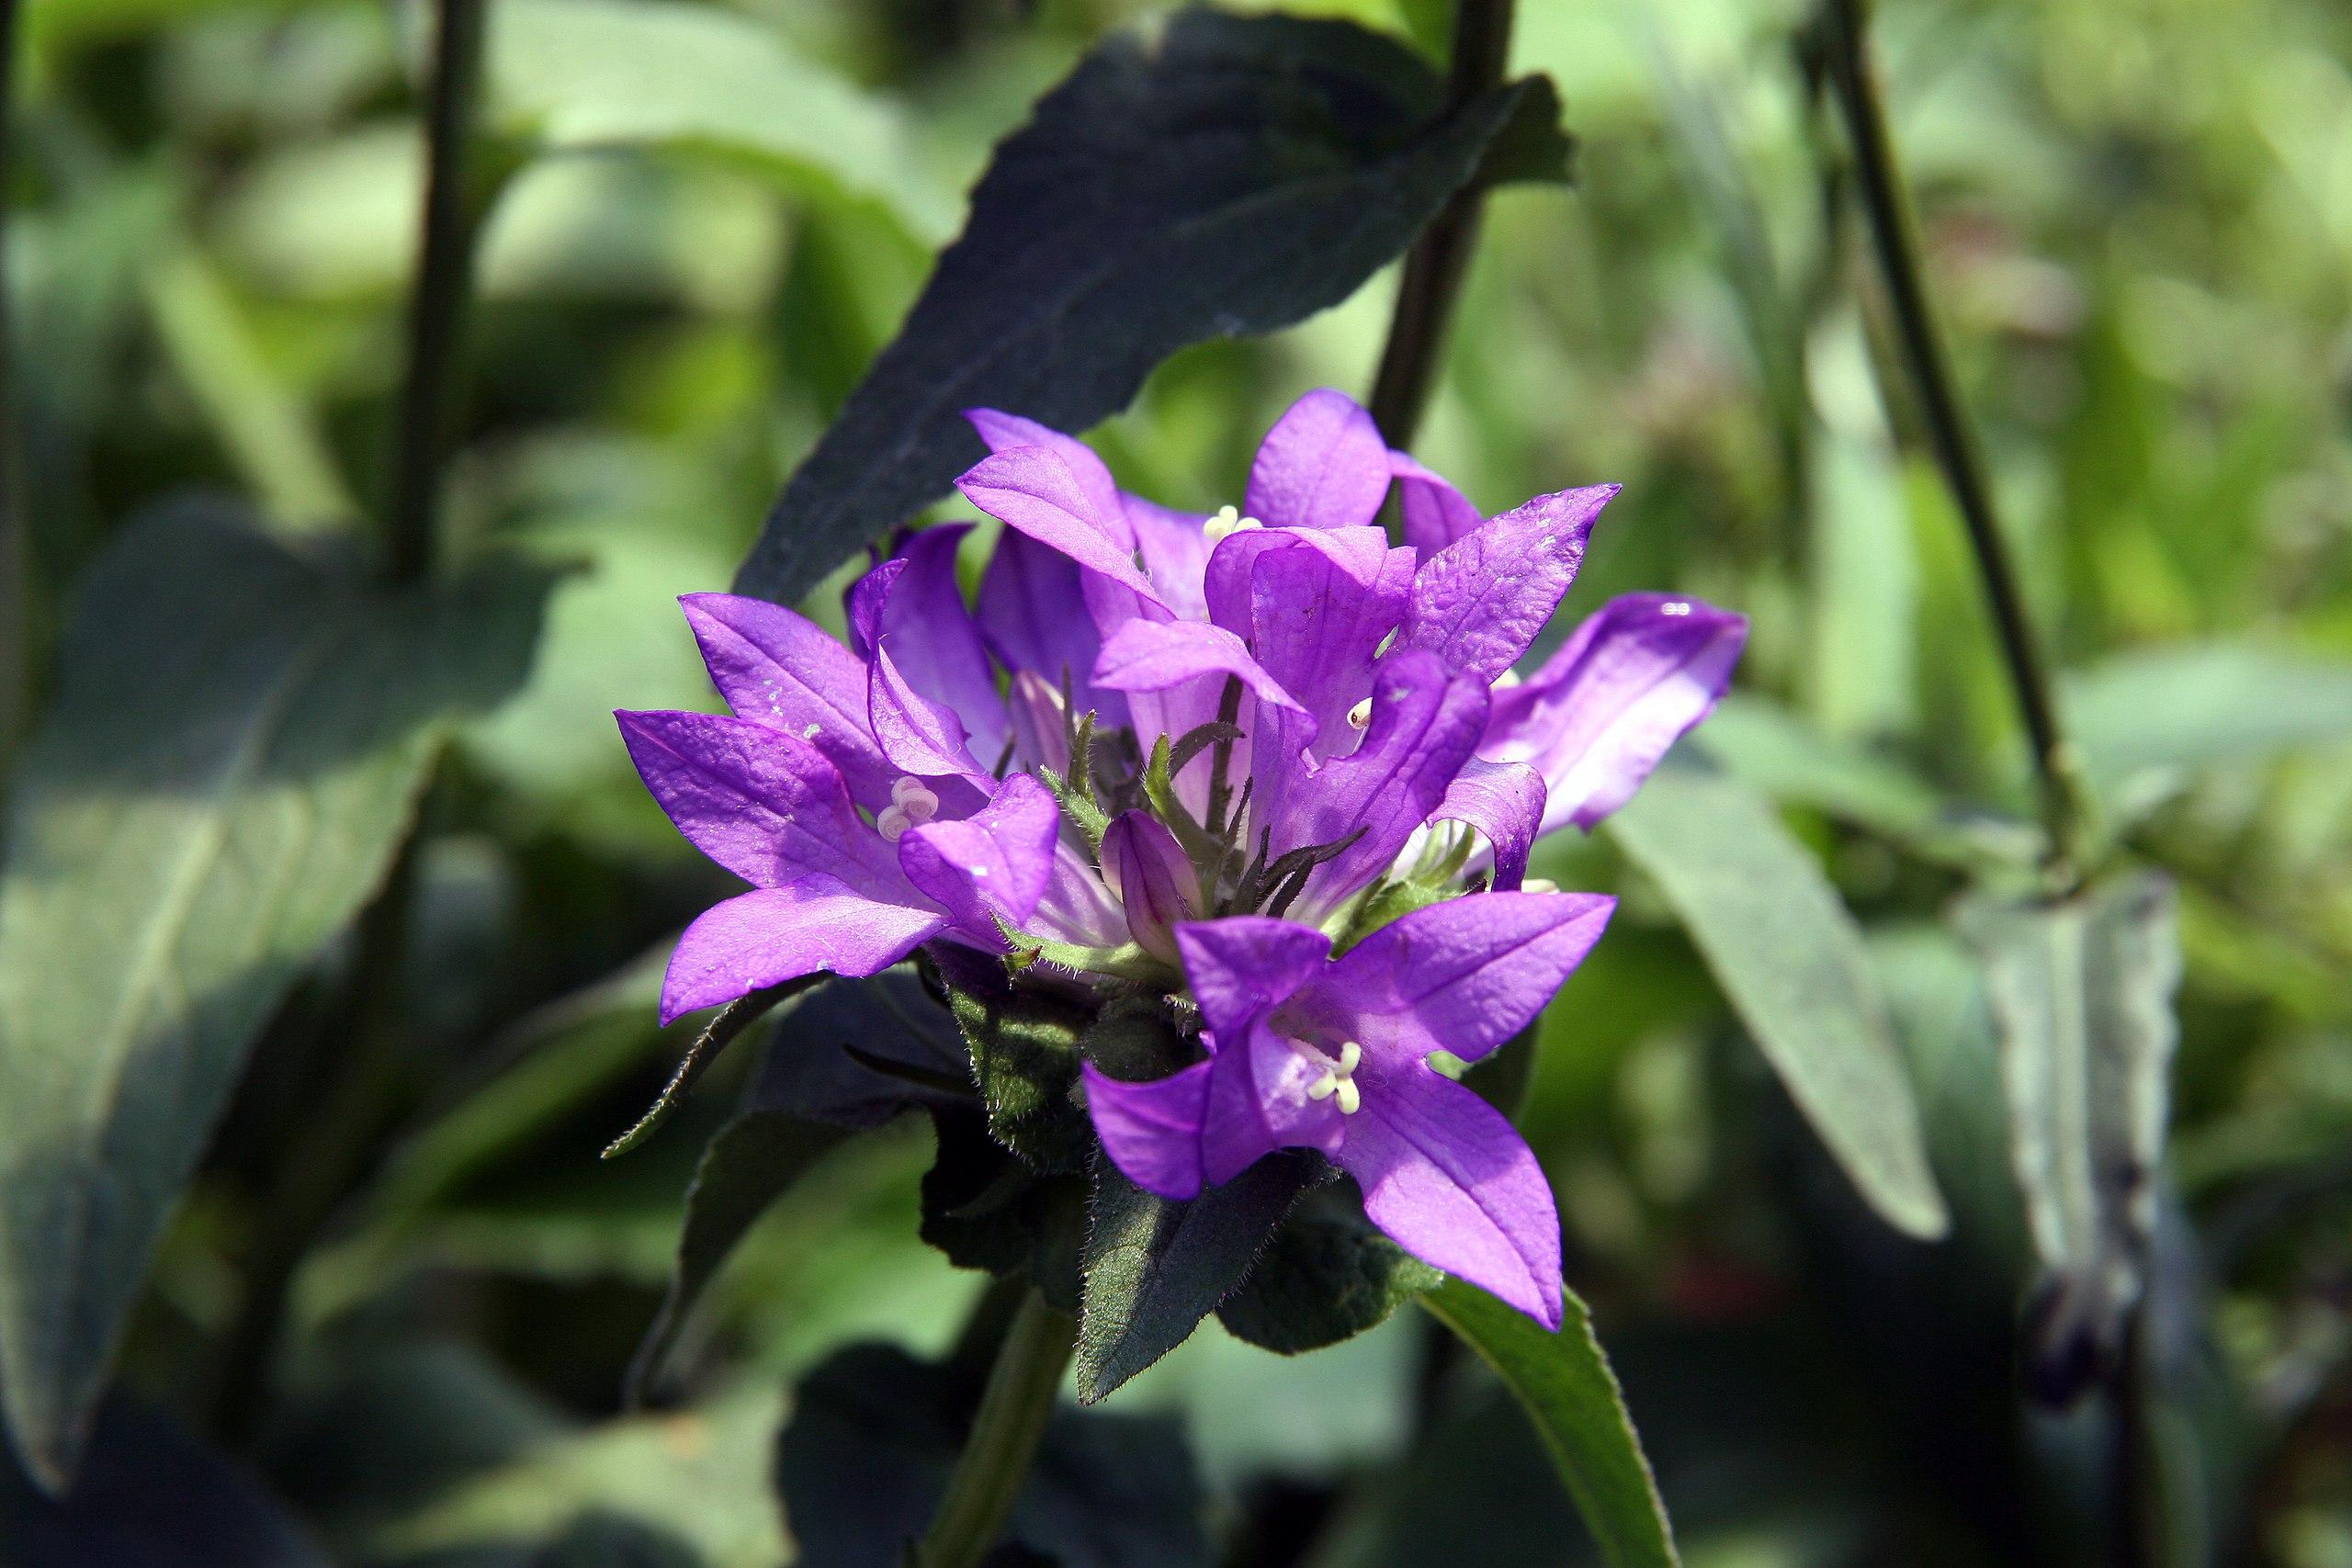 Purple flower with off-white stigma and style, green sepals white hair, dark green leaves, green stems, yellow midrib and blade.